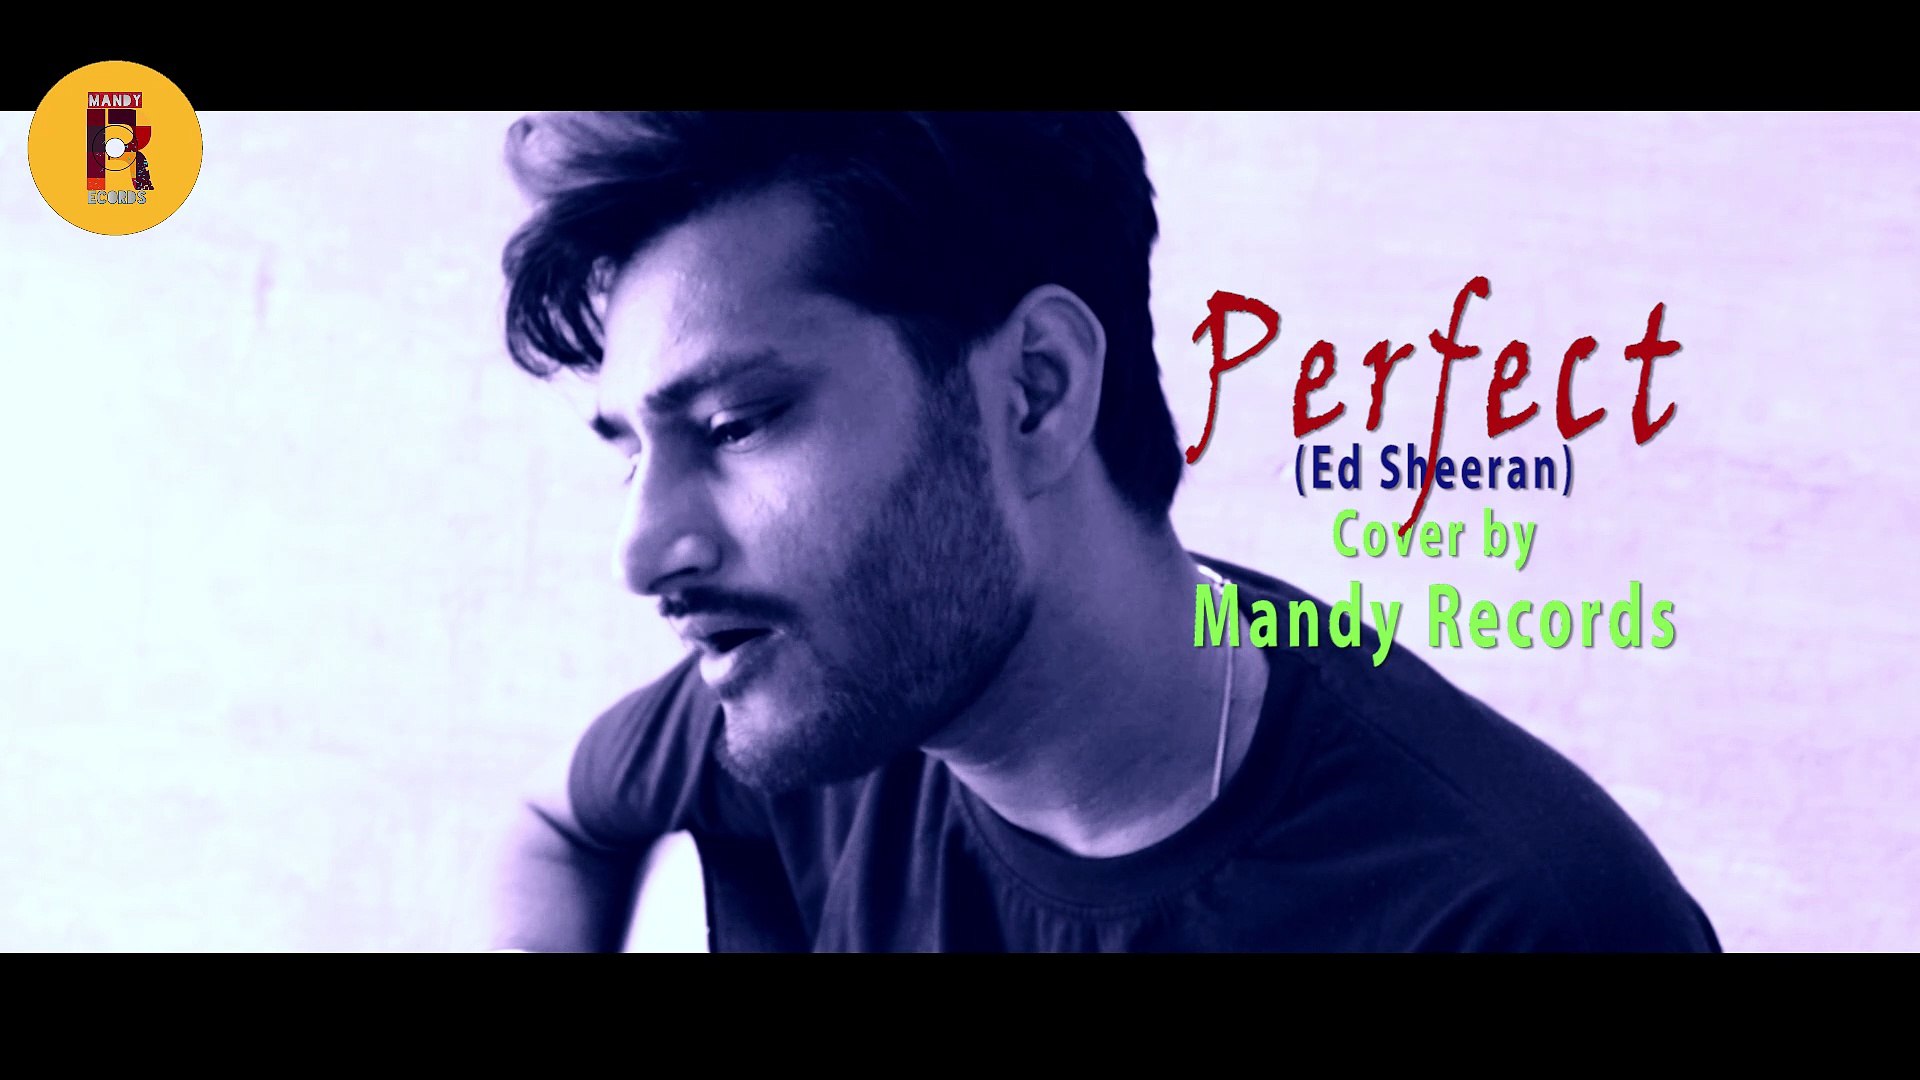 Ed Sheeran Perfect (Cover) by Mandy Records